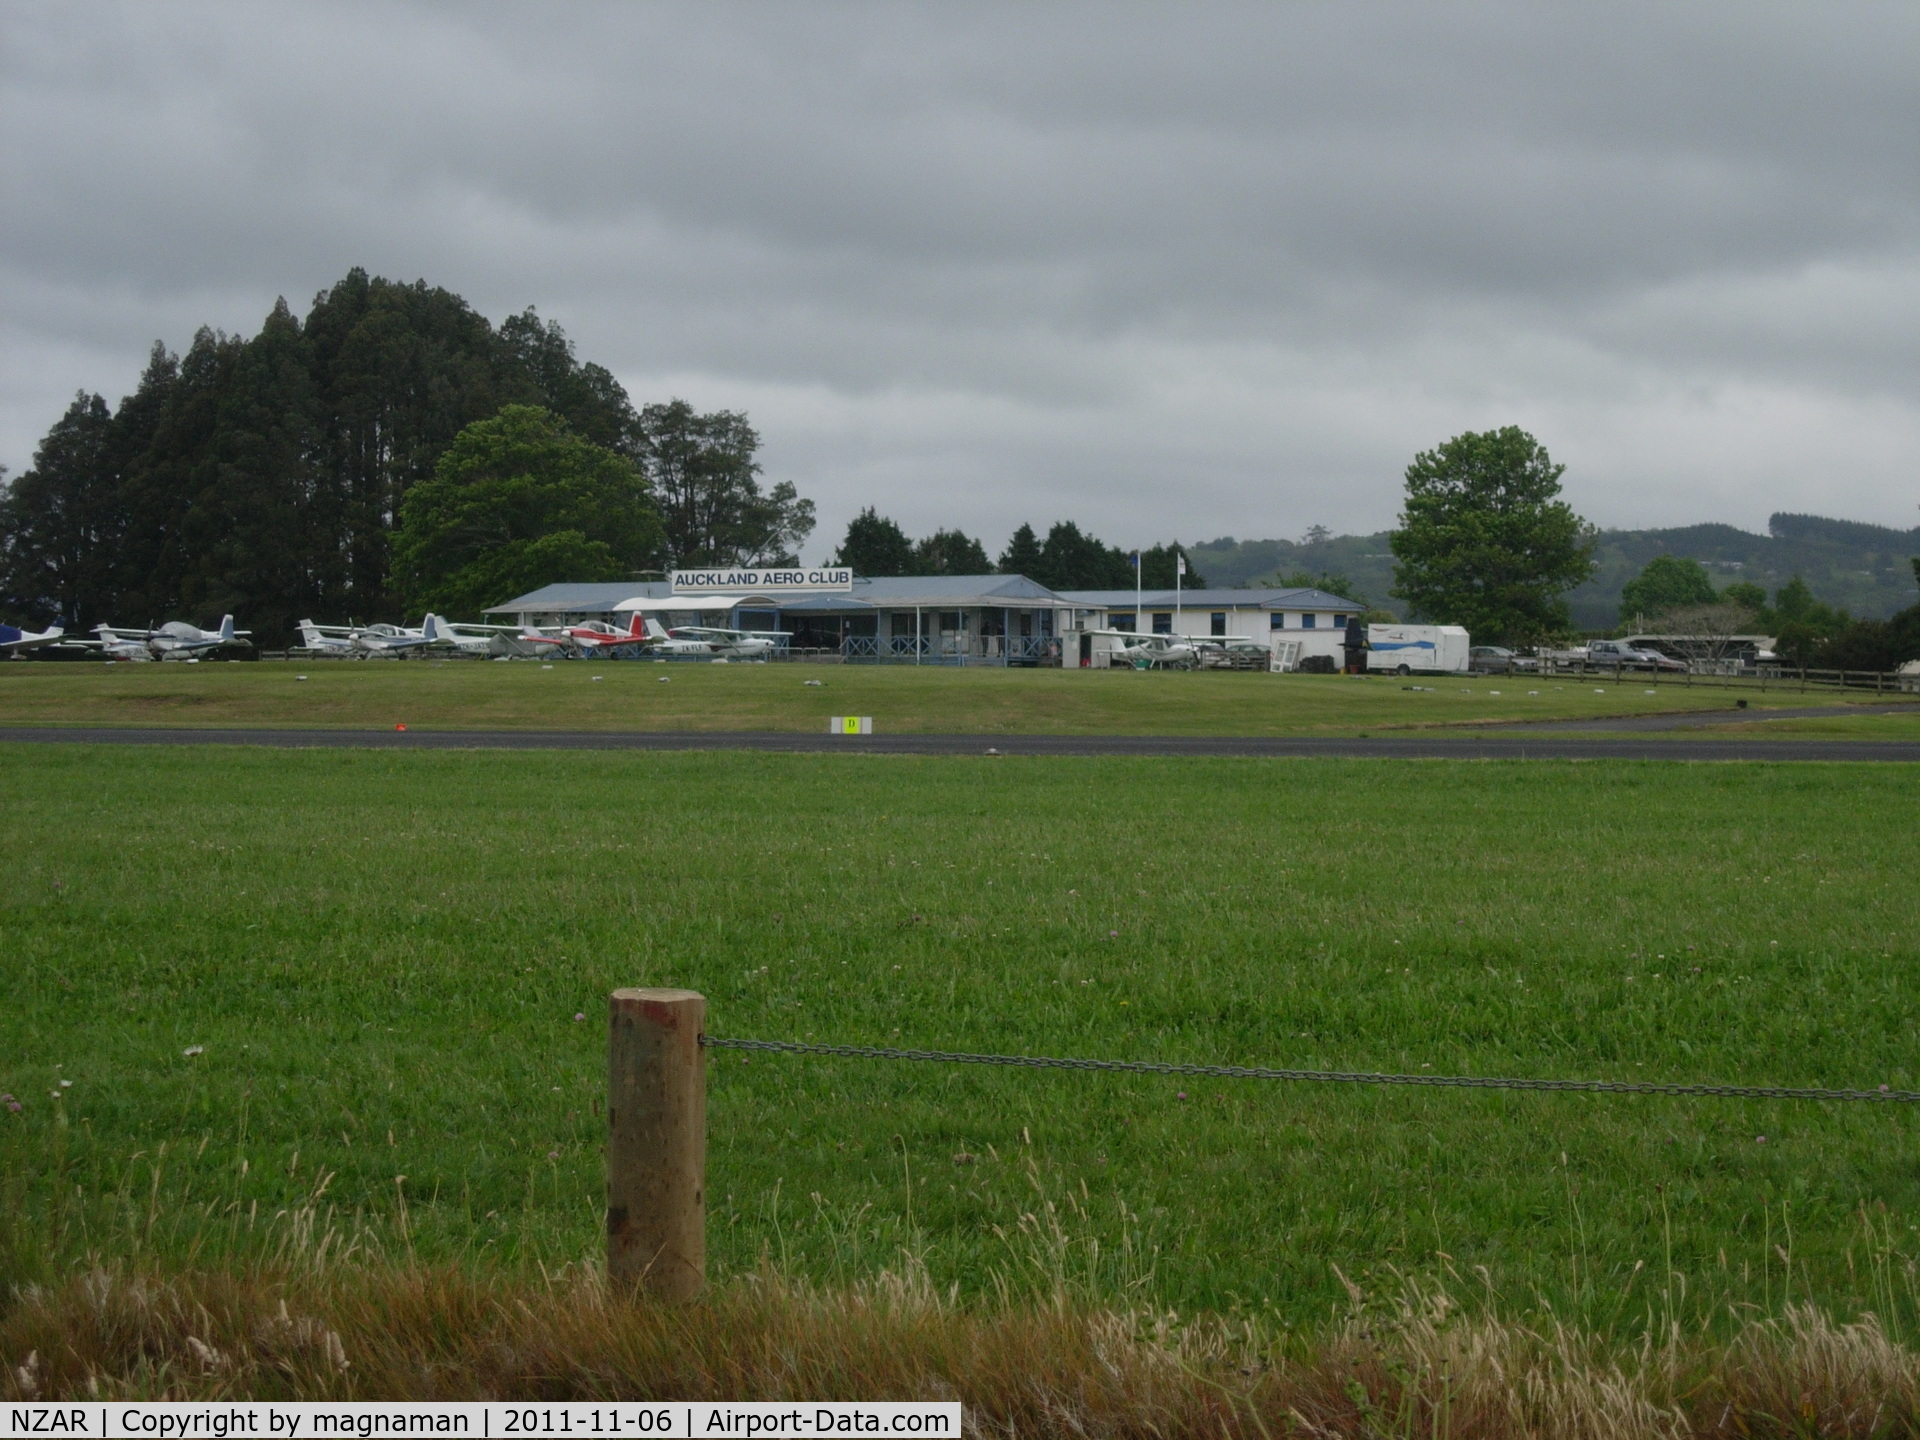 Ardmore Airport, Auckland New Zealand (NZAR) - Auckland Aero Club from other side of runway.